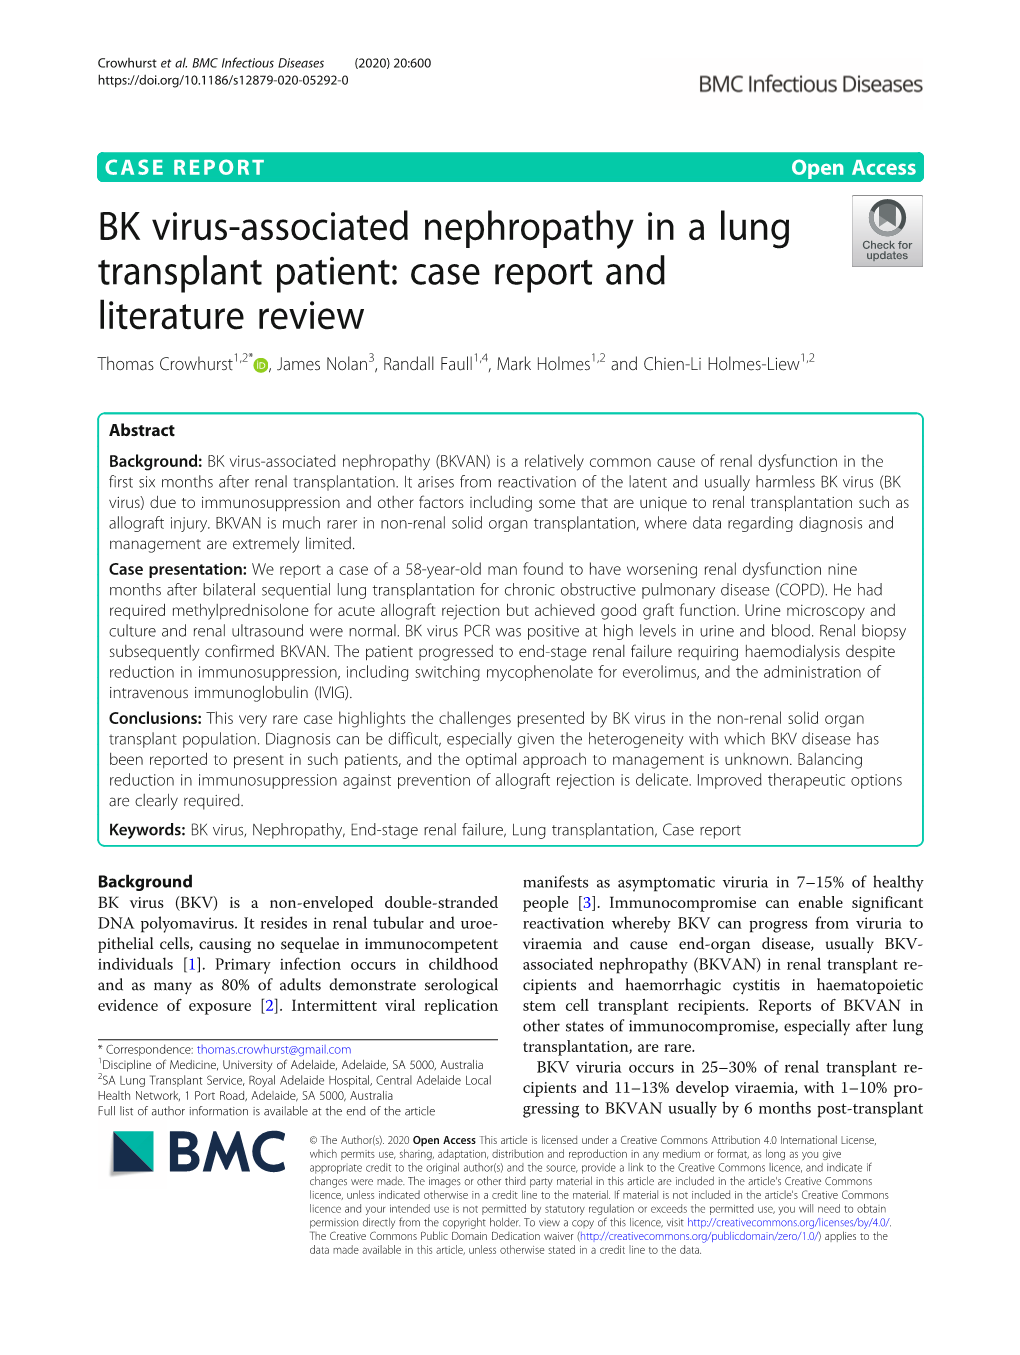 BK Virus-Associated Nephropathy in a Lung Transplant Patient